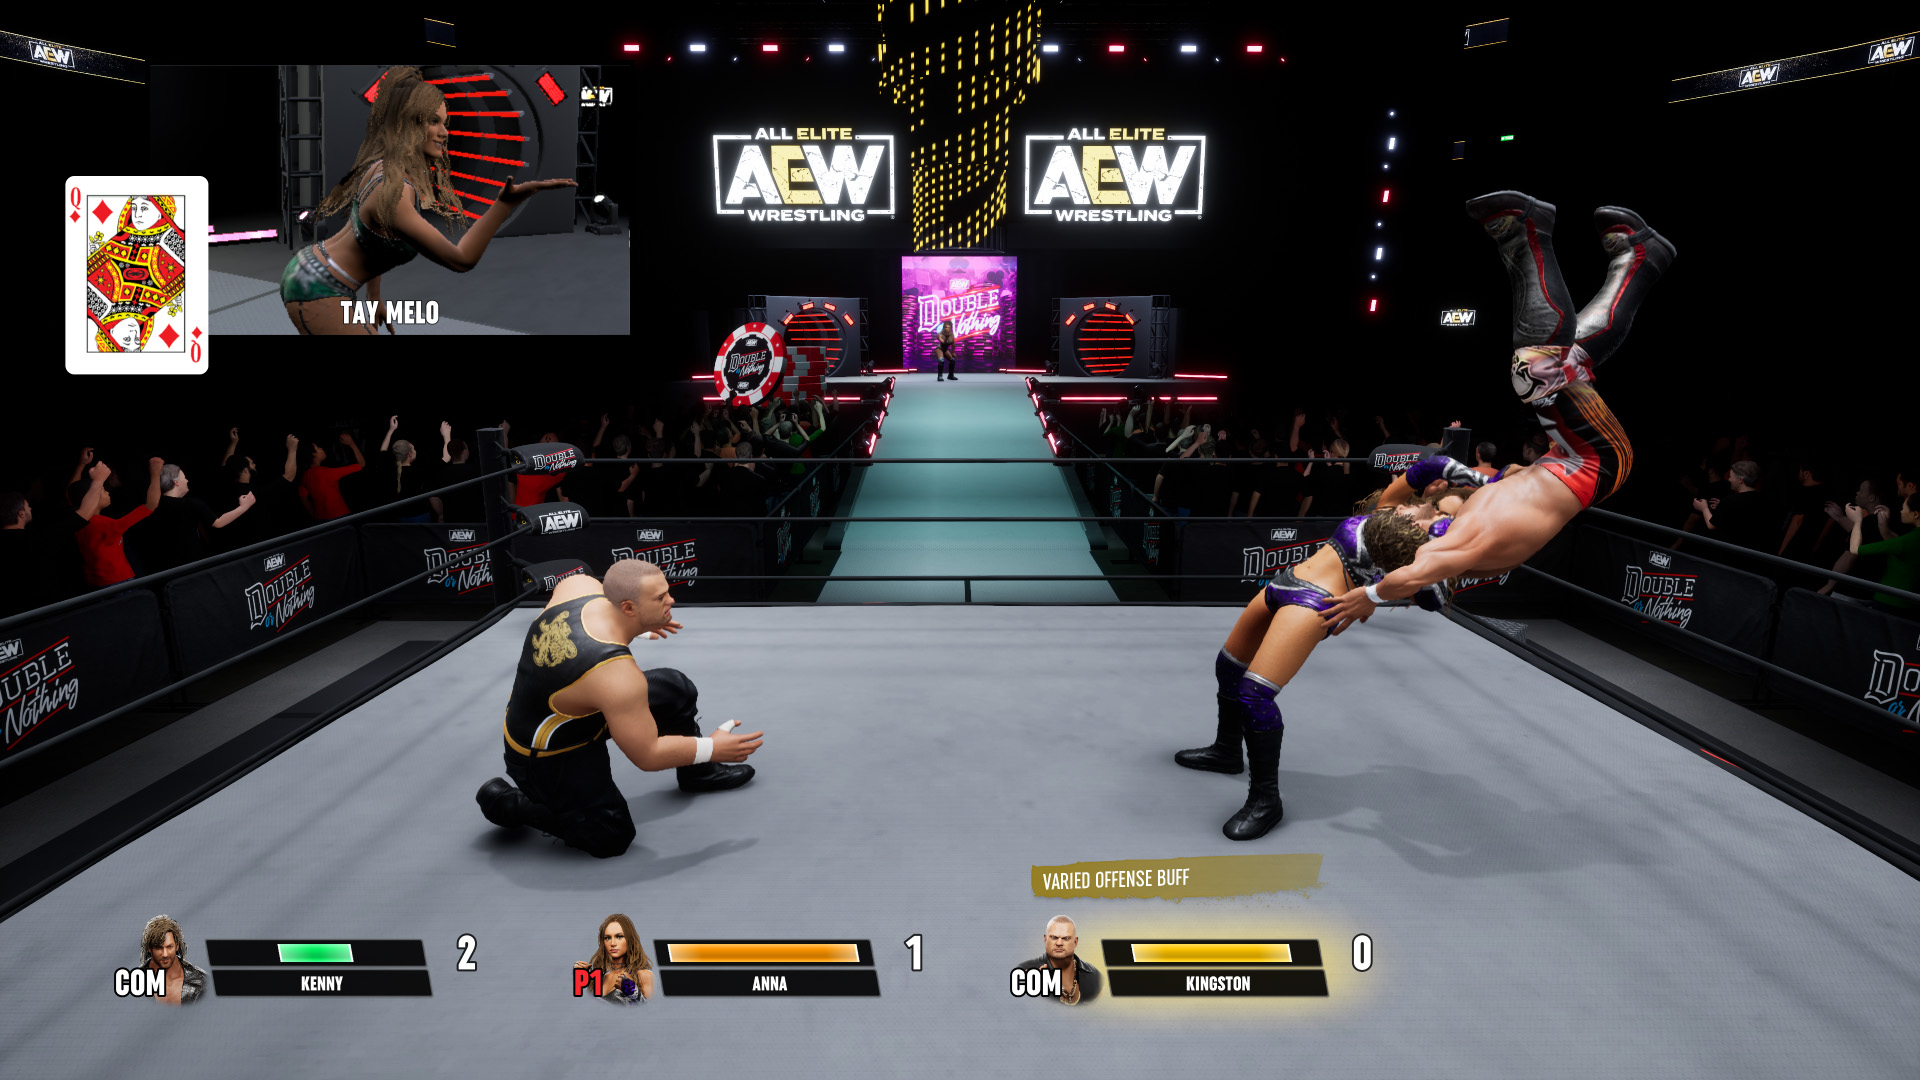 AEW: Fight Forever - Official Game Site